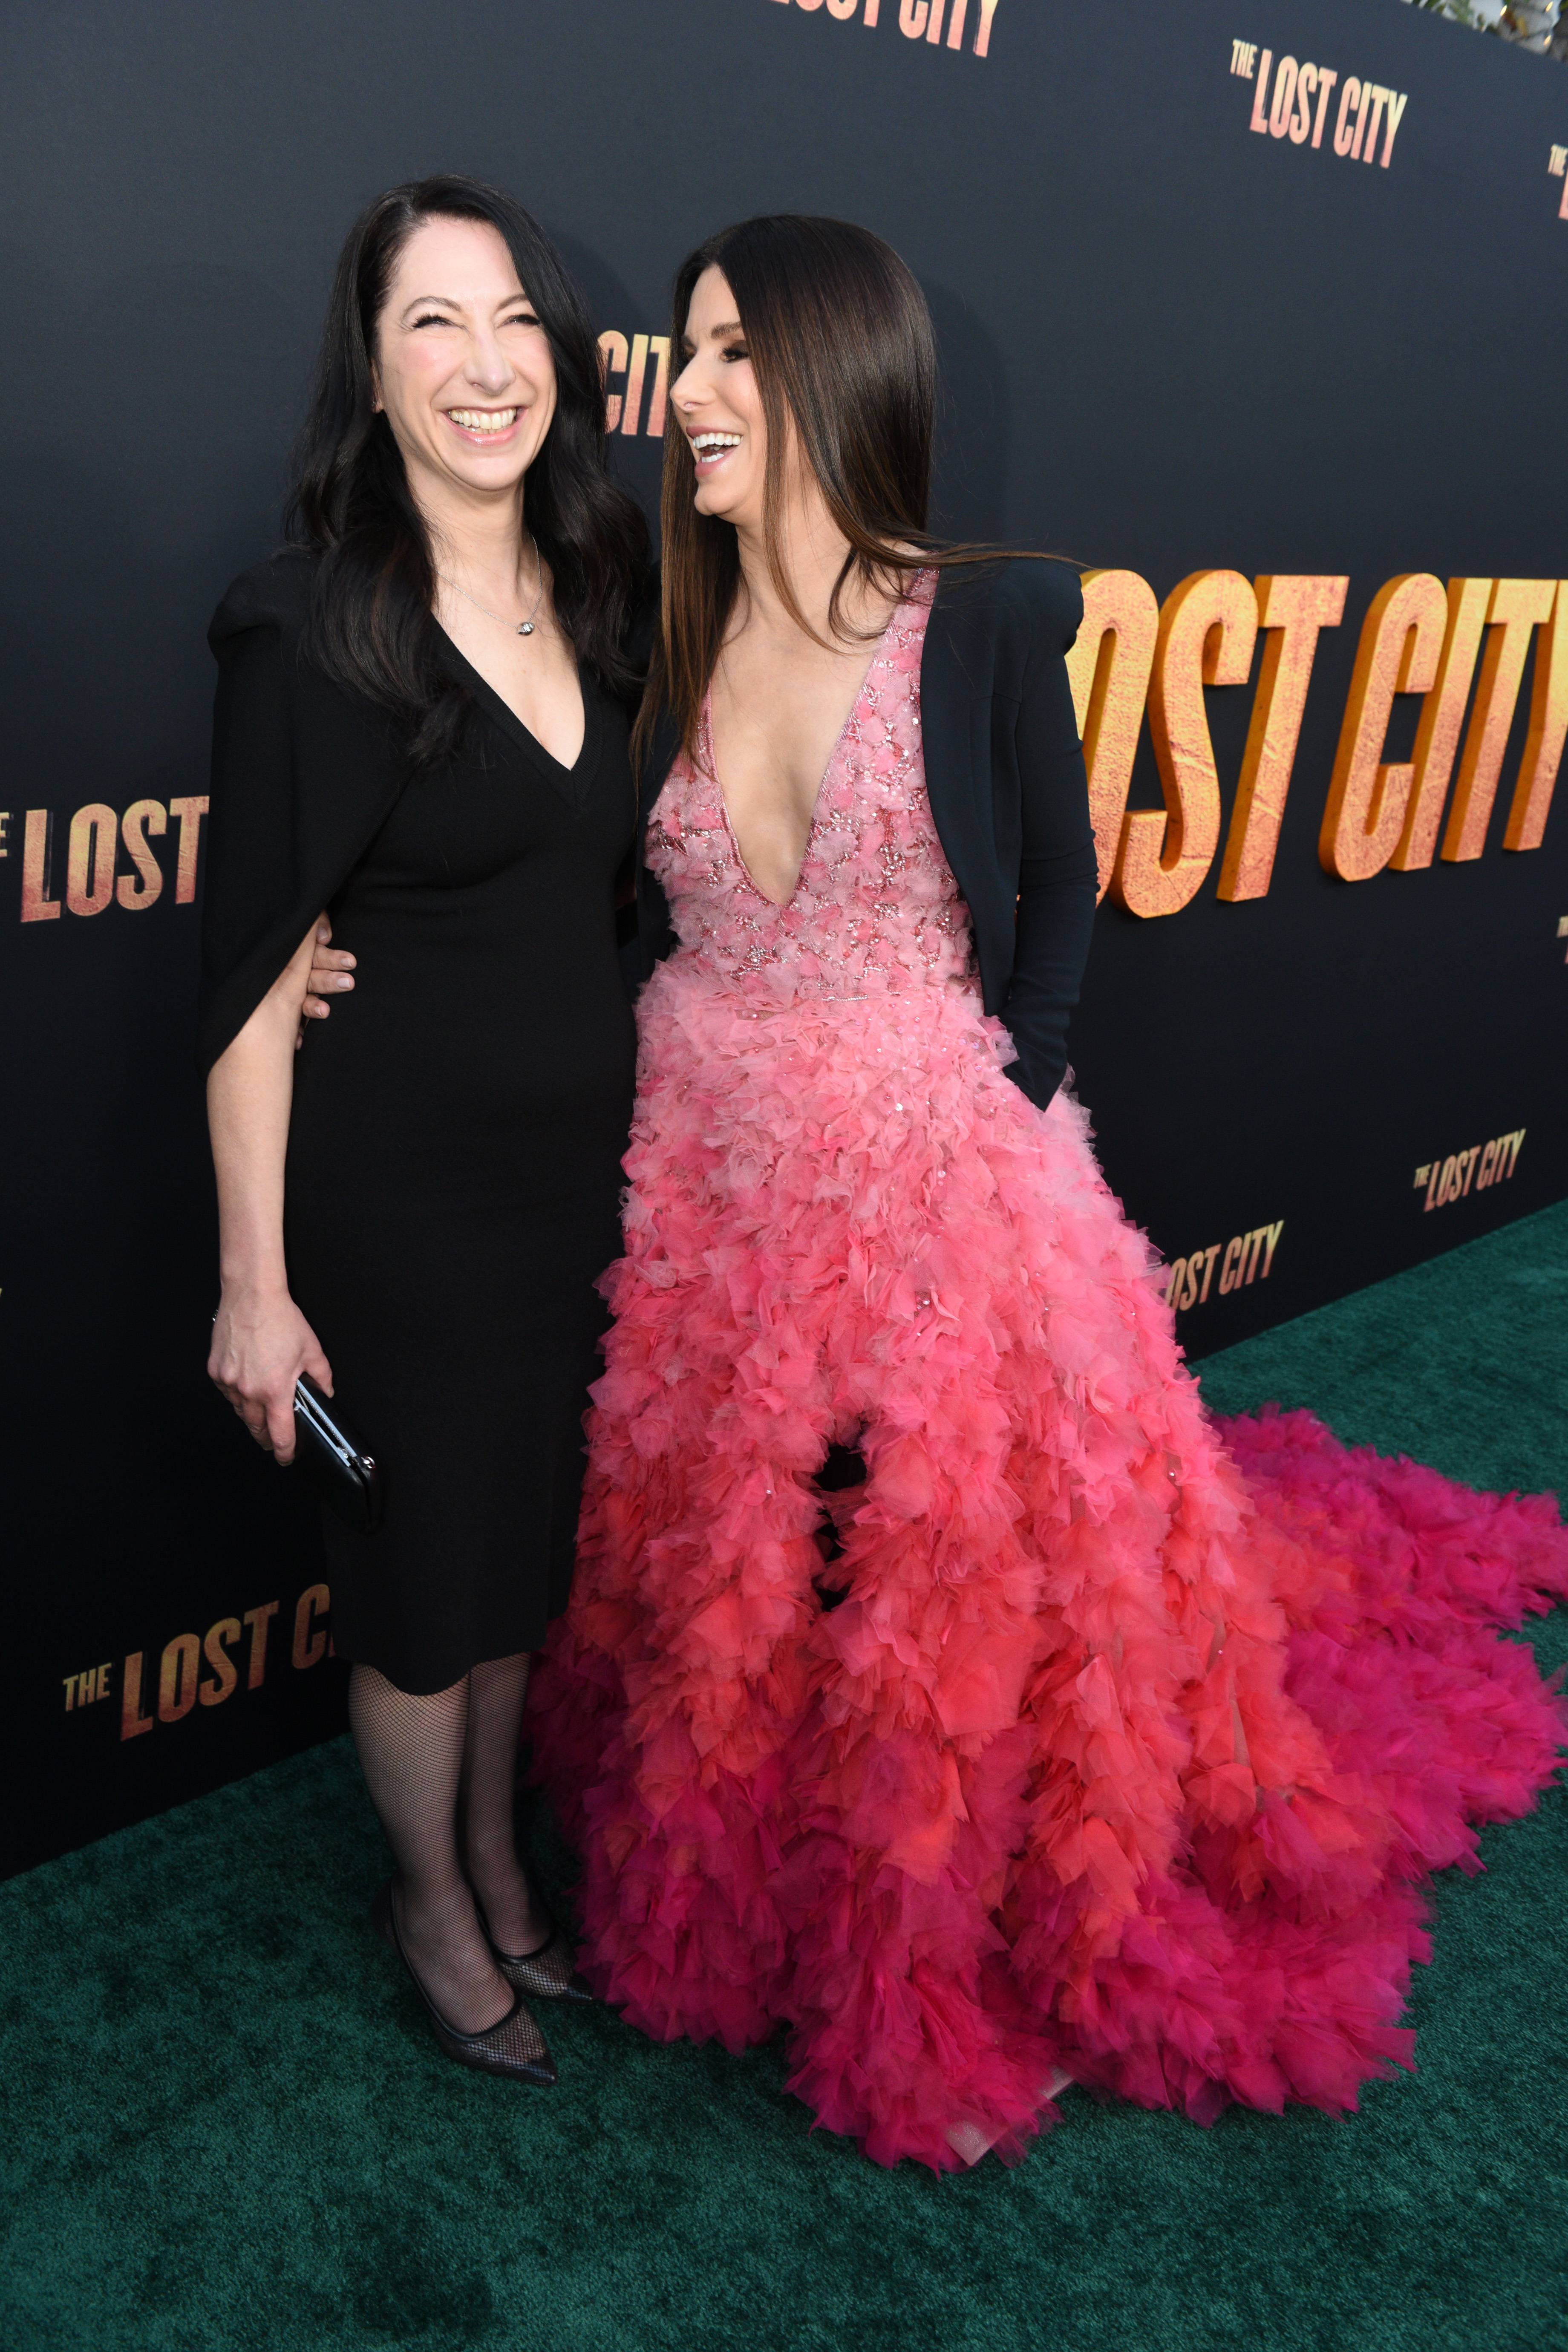 Gesine Bullock-Prado and Sandra Bullock at the Los Angeles premiere of "The Lost City," 2022 | Source: Getty Images